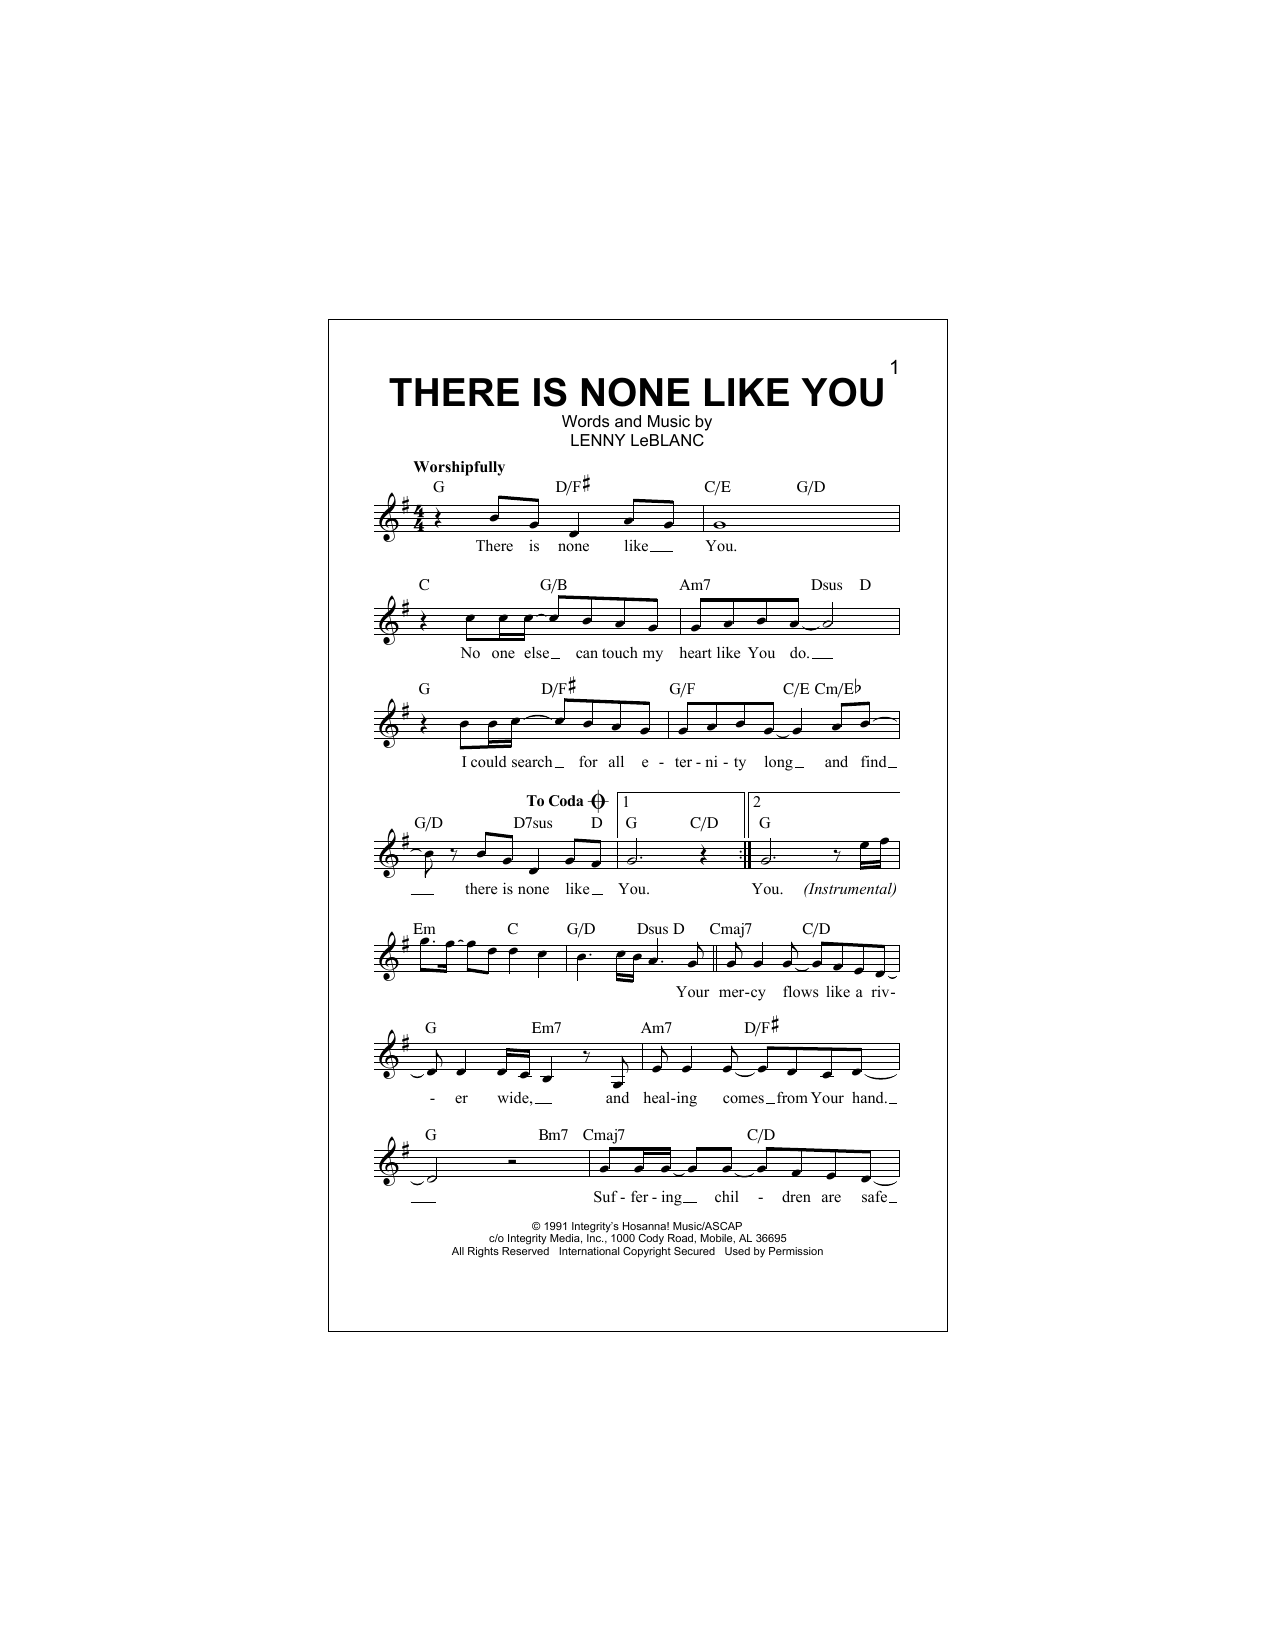 Download Lenny LeBlanc There Is None Like You Sheet Music